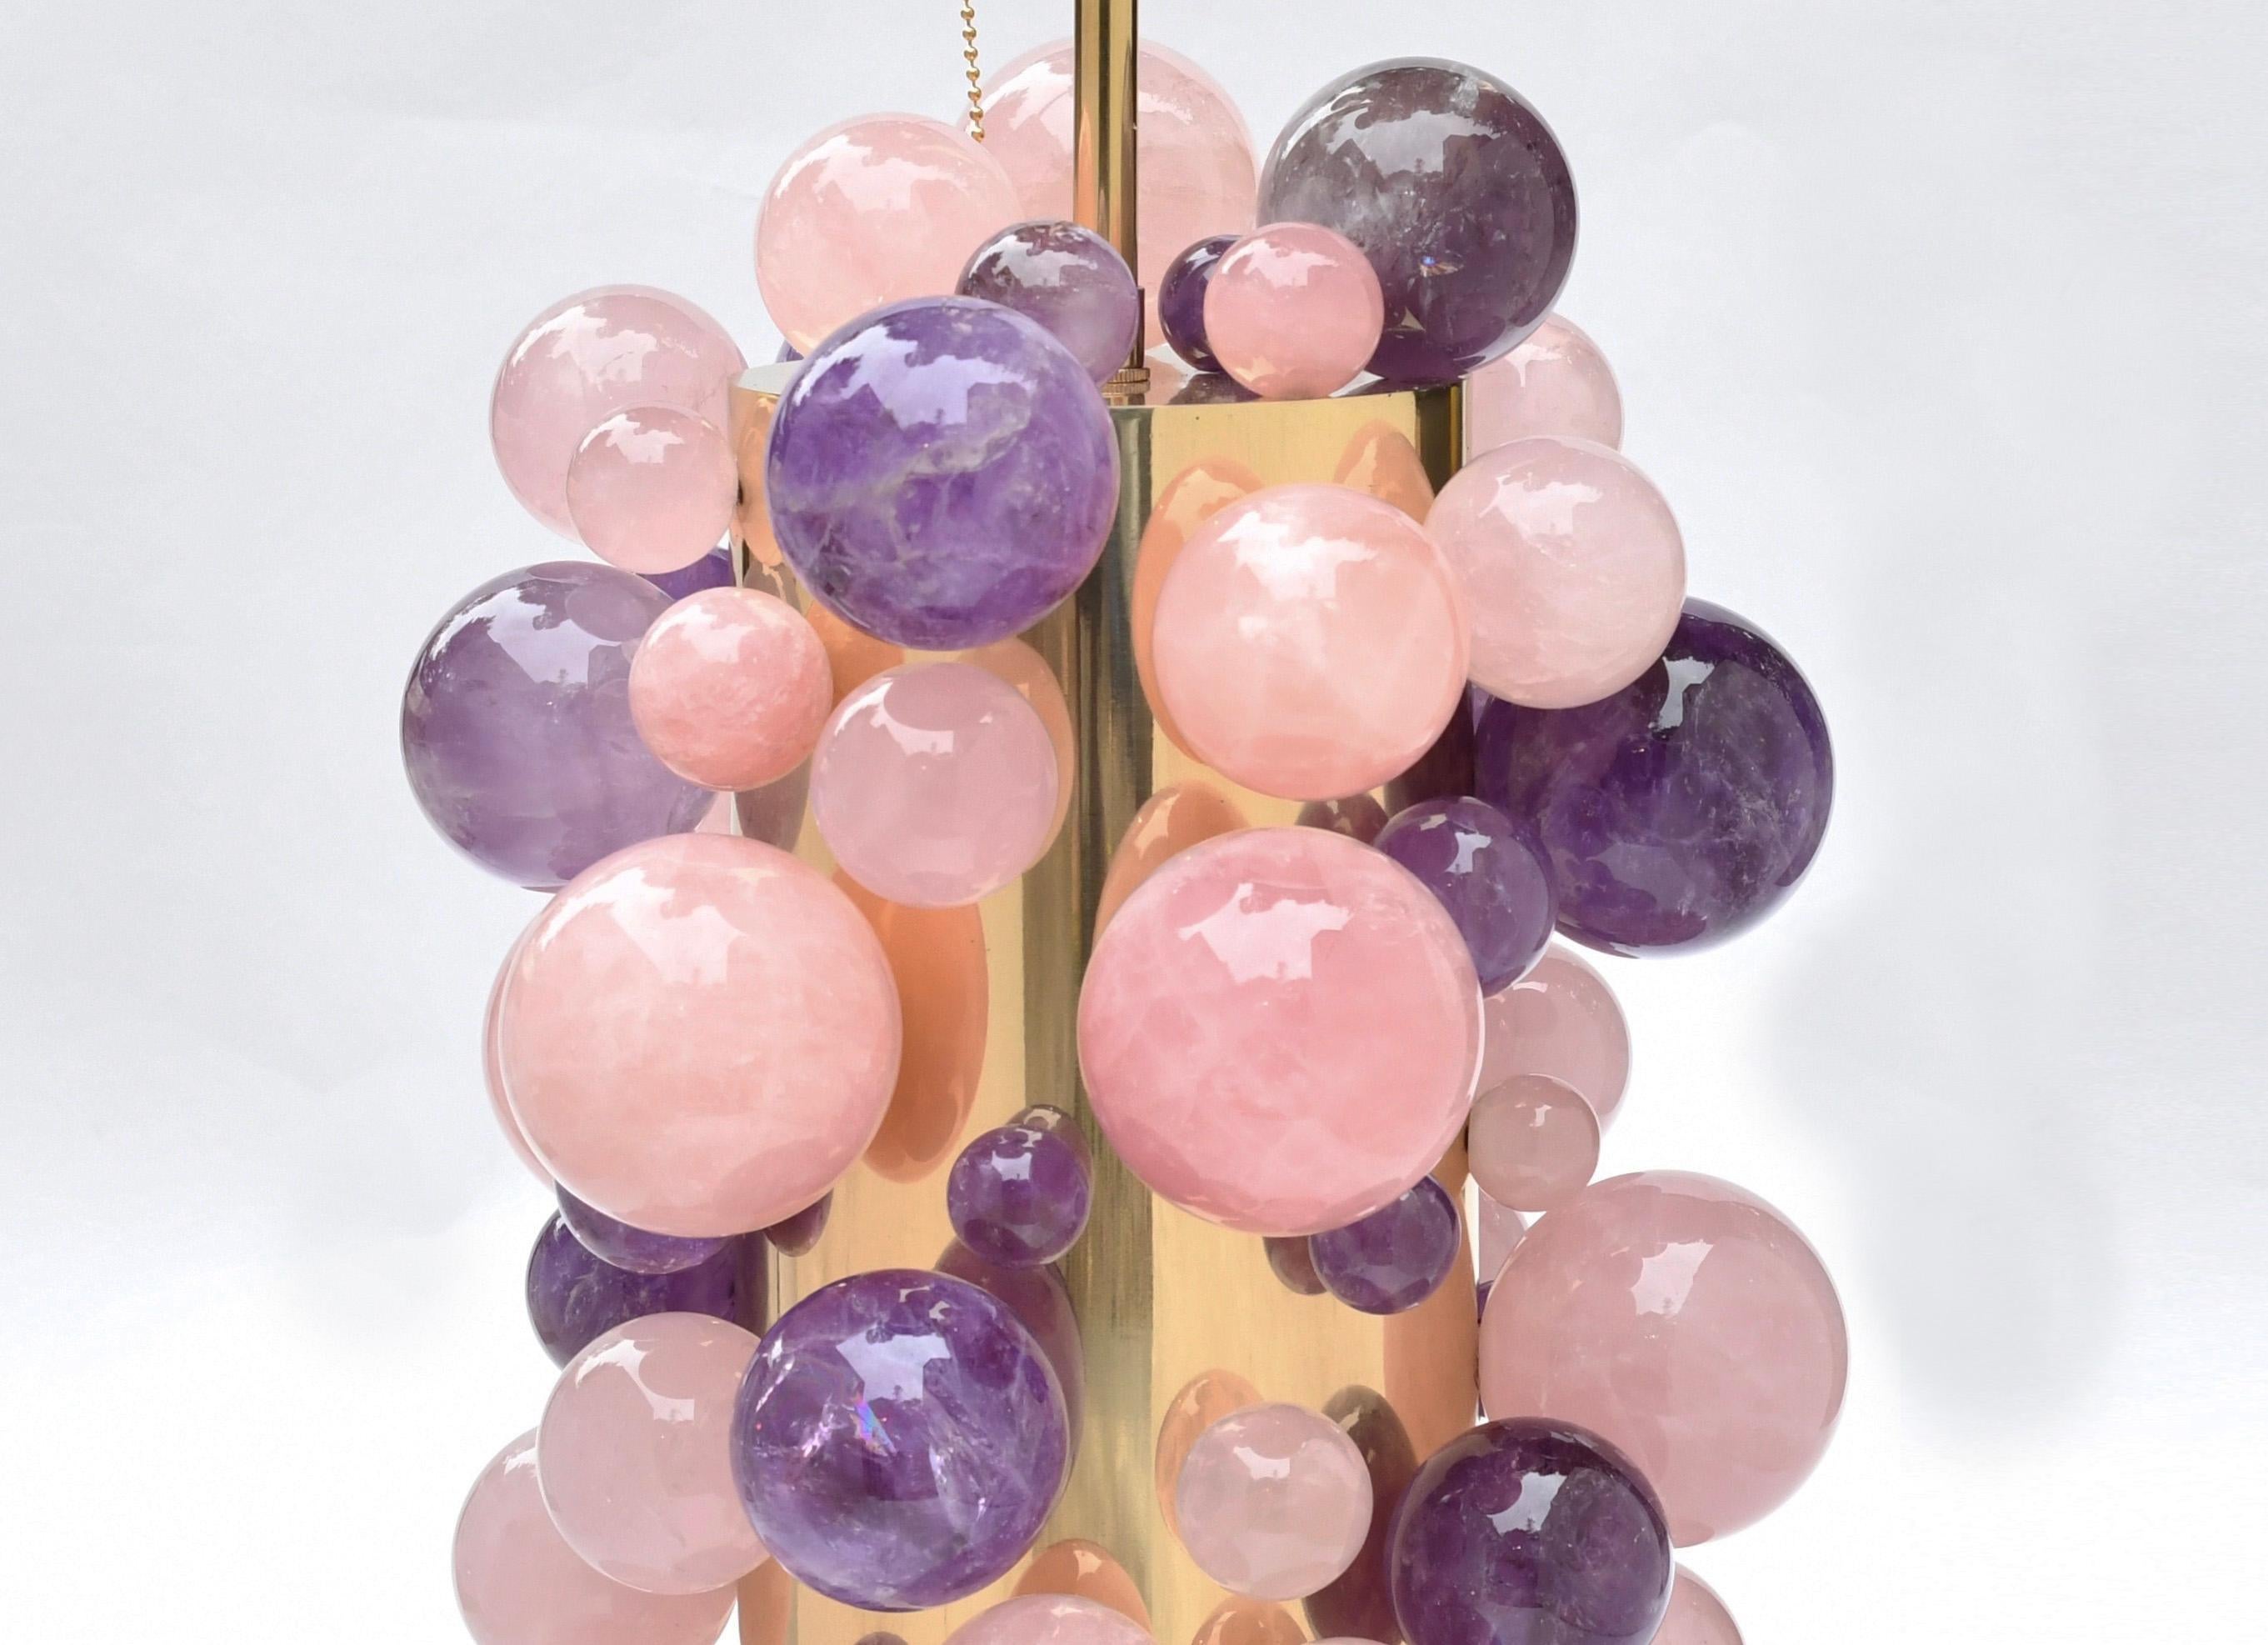 Pair of amethyst and pink rock crystal bubble lamps with polished brass finish. Created by Phoenix Gallery, NYC.
To the top of rock crystal part: 17